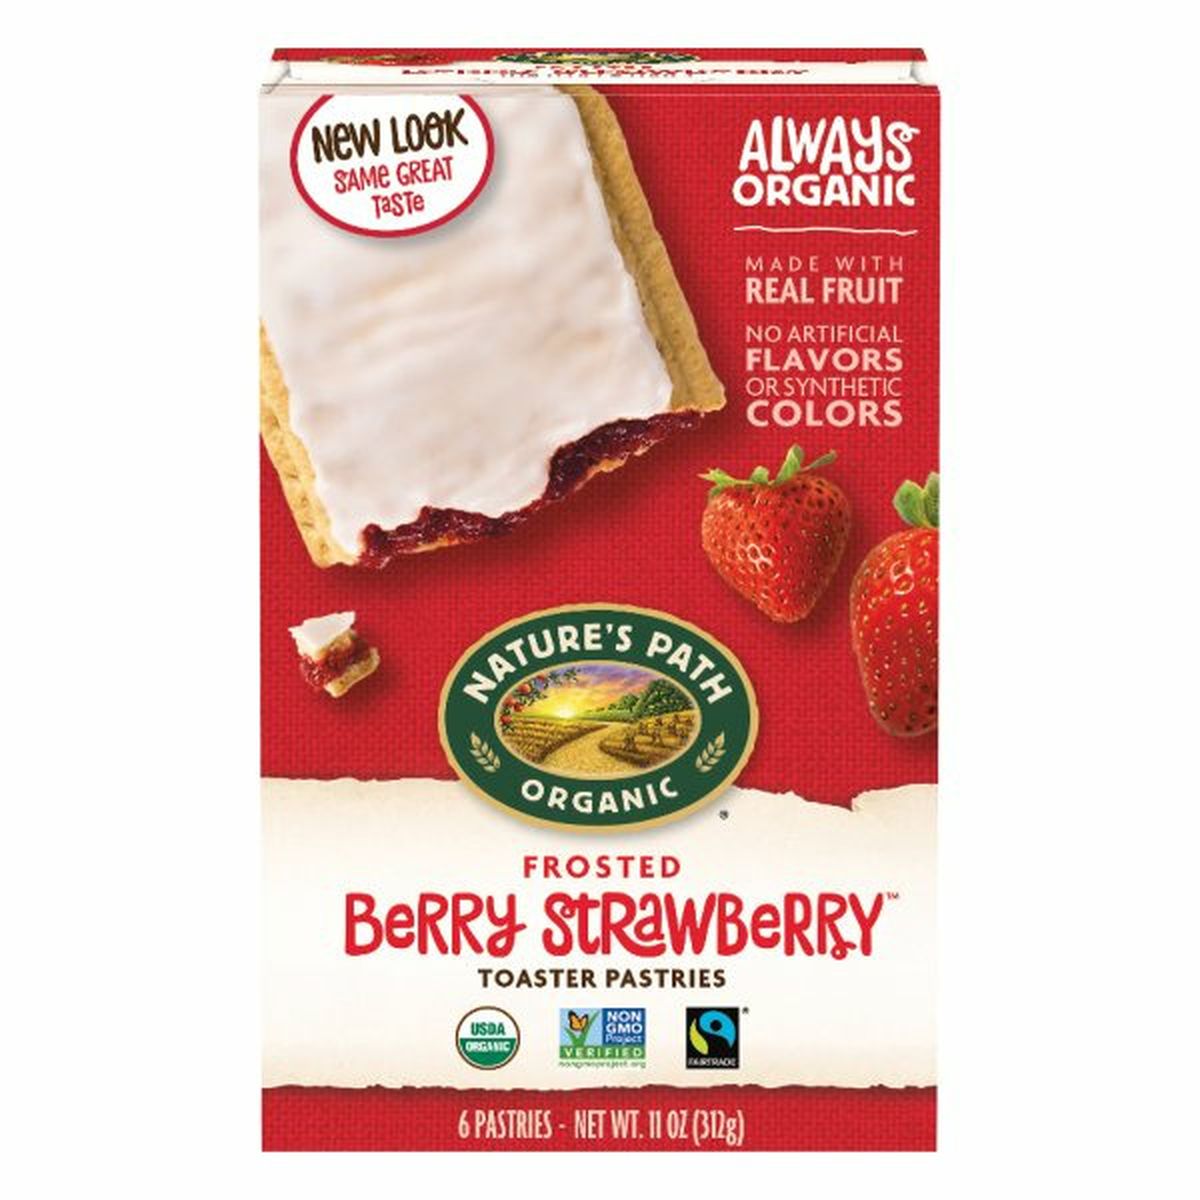 Calories in Nature's Path Toaster Pastries, Berry Strawberry, Frosted